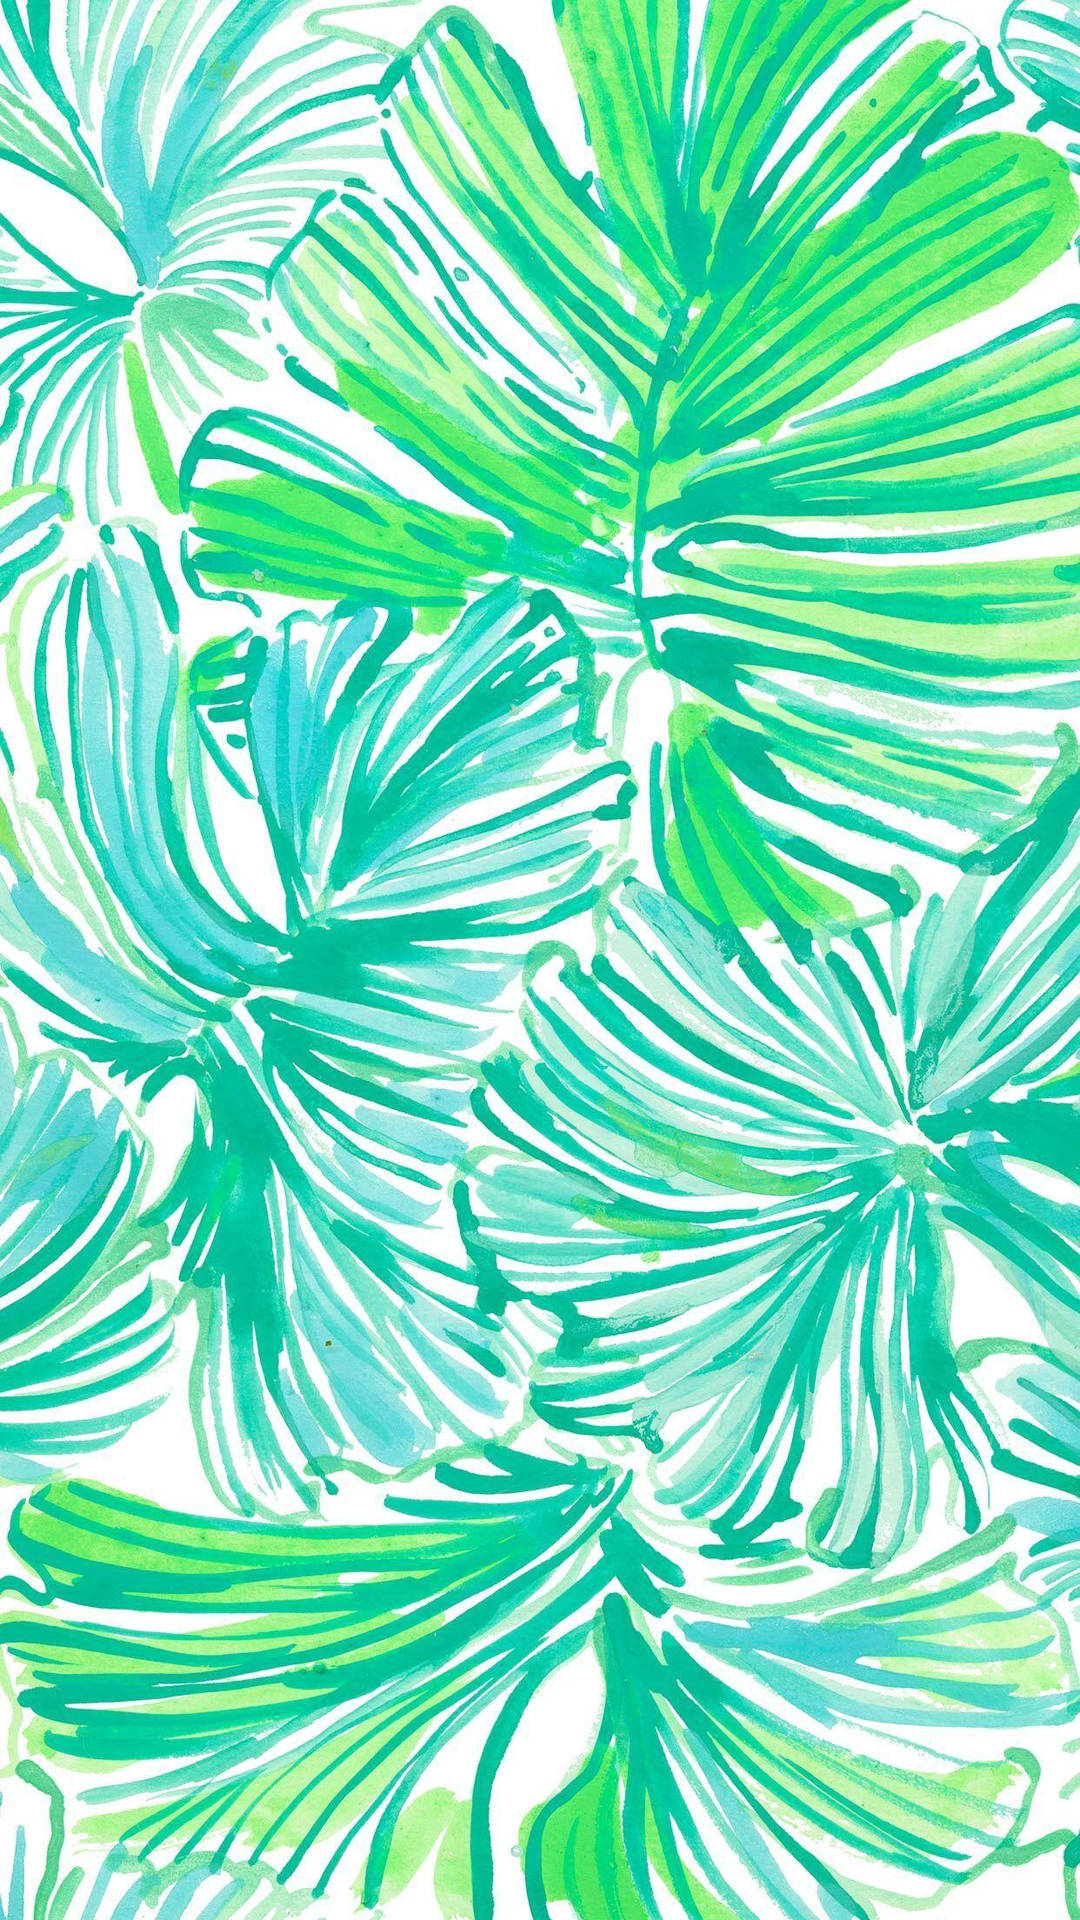 Lilly Pulitzer - Palm Leaves Wallpaper Wallpaper